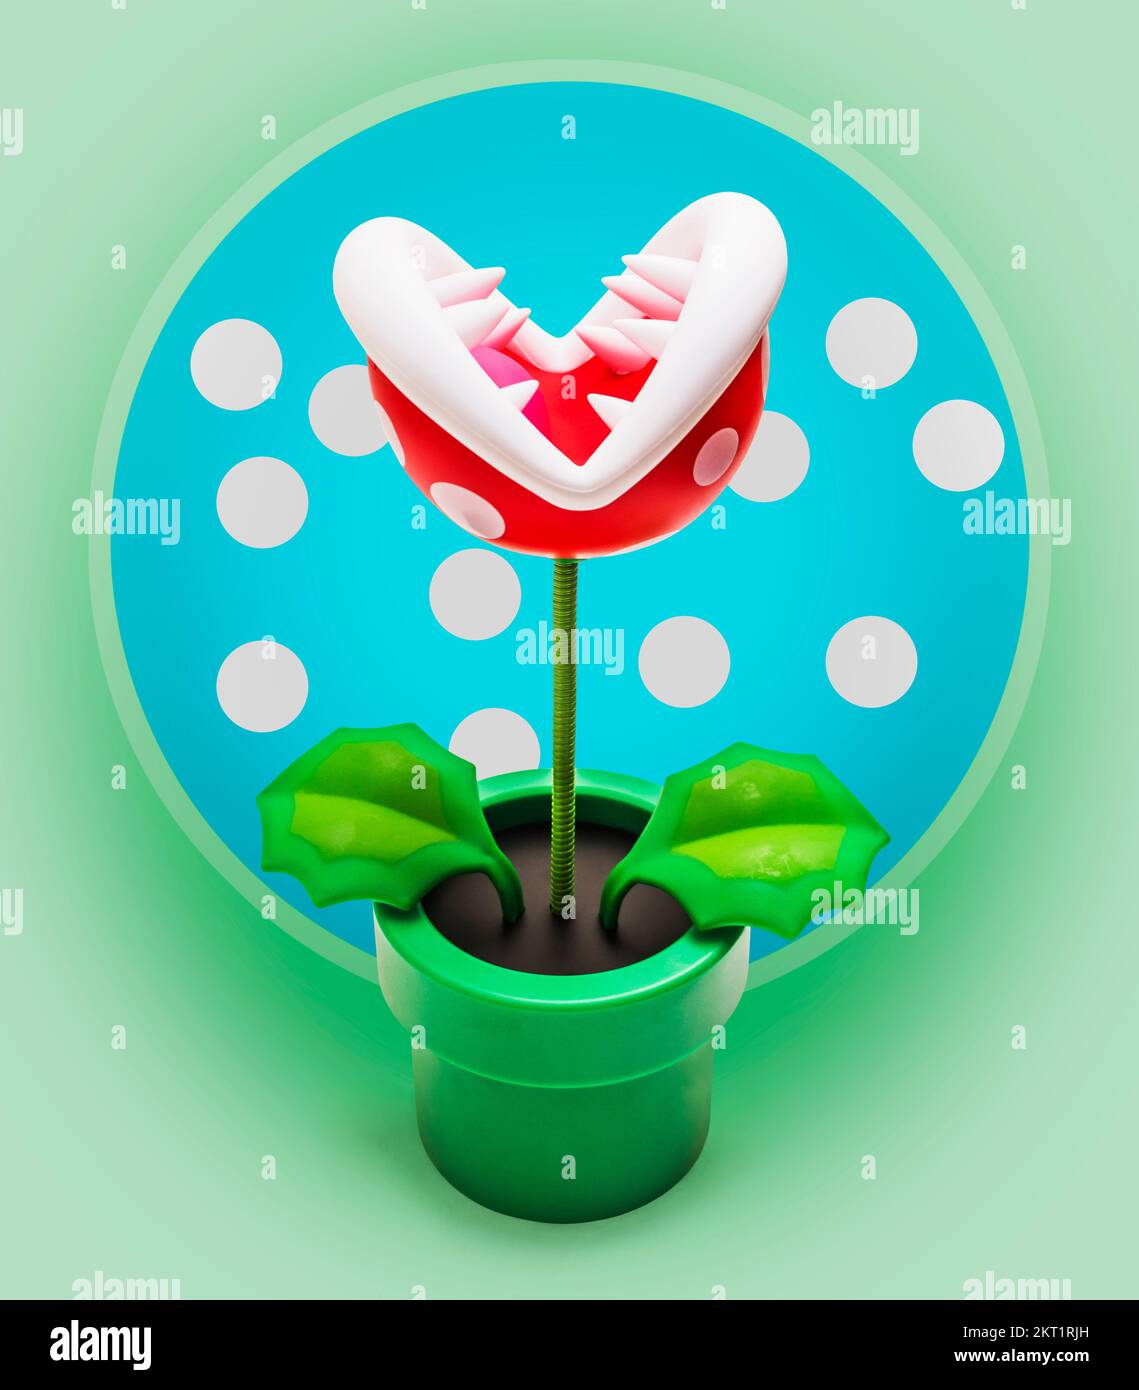 Cartoonish game play in a arcade of creepy fun with piranha plant on decorative blue background. Bitancial Stock Photo